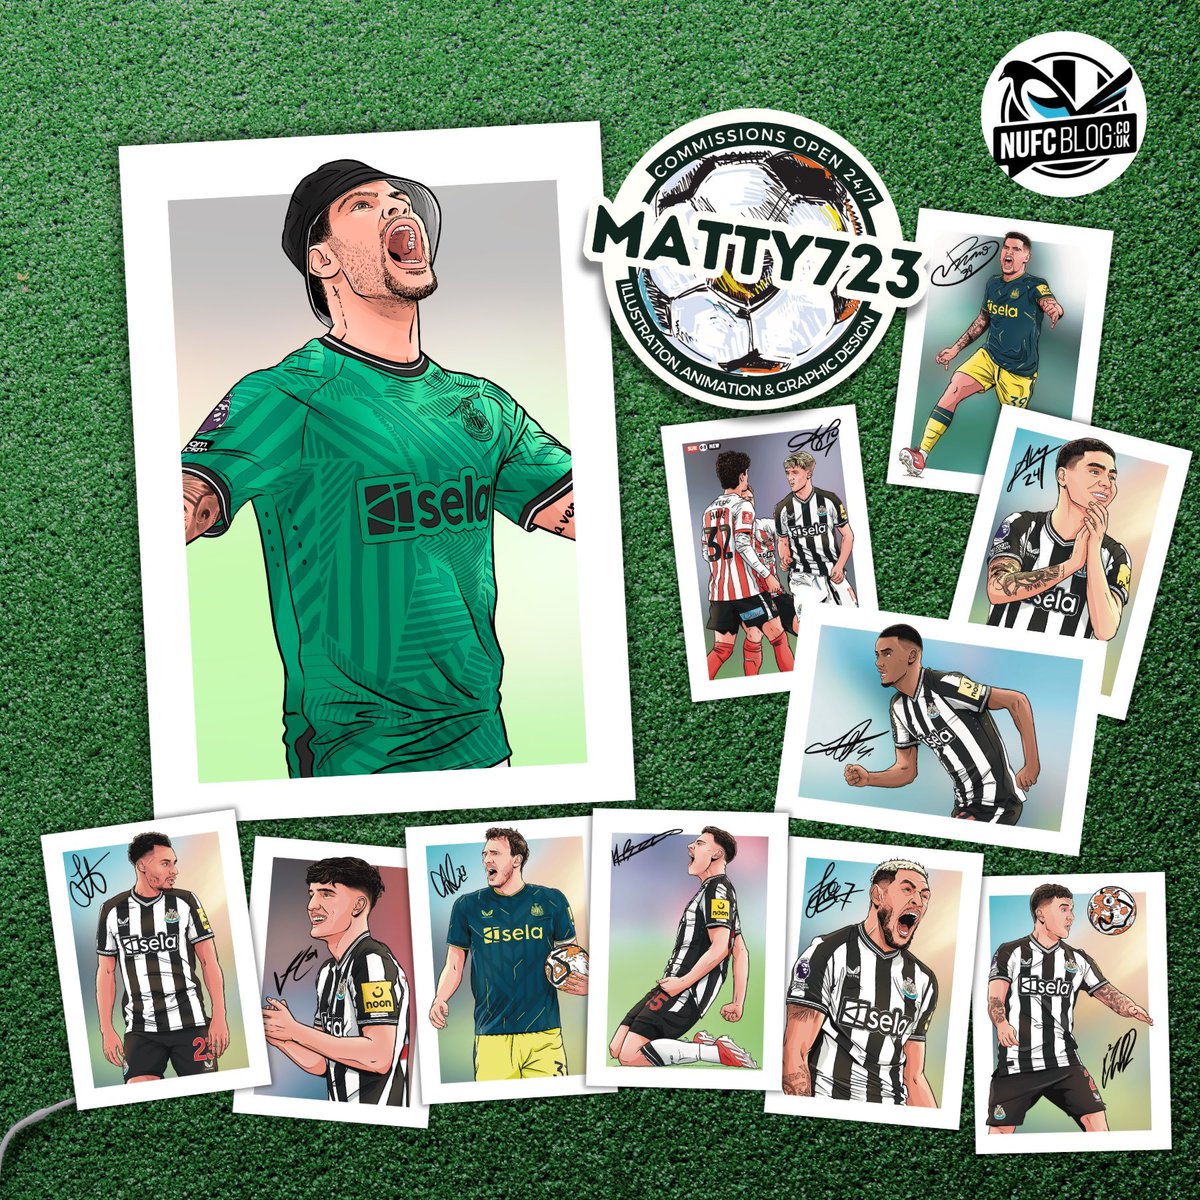 🎁 COMPETITION GIVEAWAY! ⚫️⚪️

We're giving away this brilliant bundle of NUFC prints - featuring Bruno's iconic celebration - courtesy of @_Matty723 😍

To enter:

1⃣ RT and like
2⃣ Follow @NUFCblogcouk 
3⃣ Follow @_Matty723 

Winner announced this weekend! 

 @brunoog97